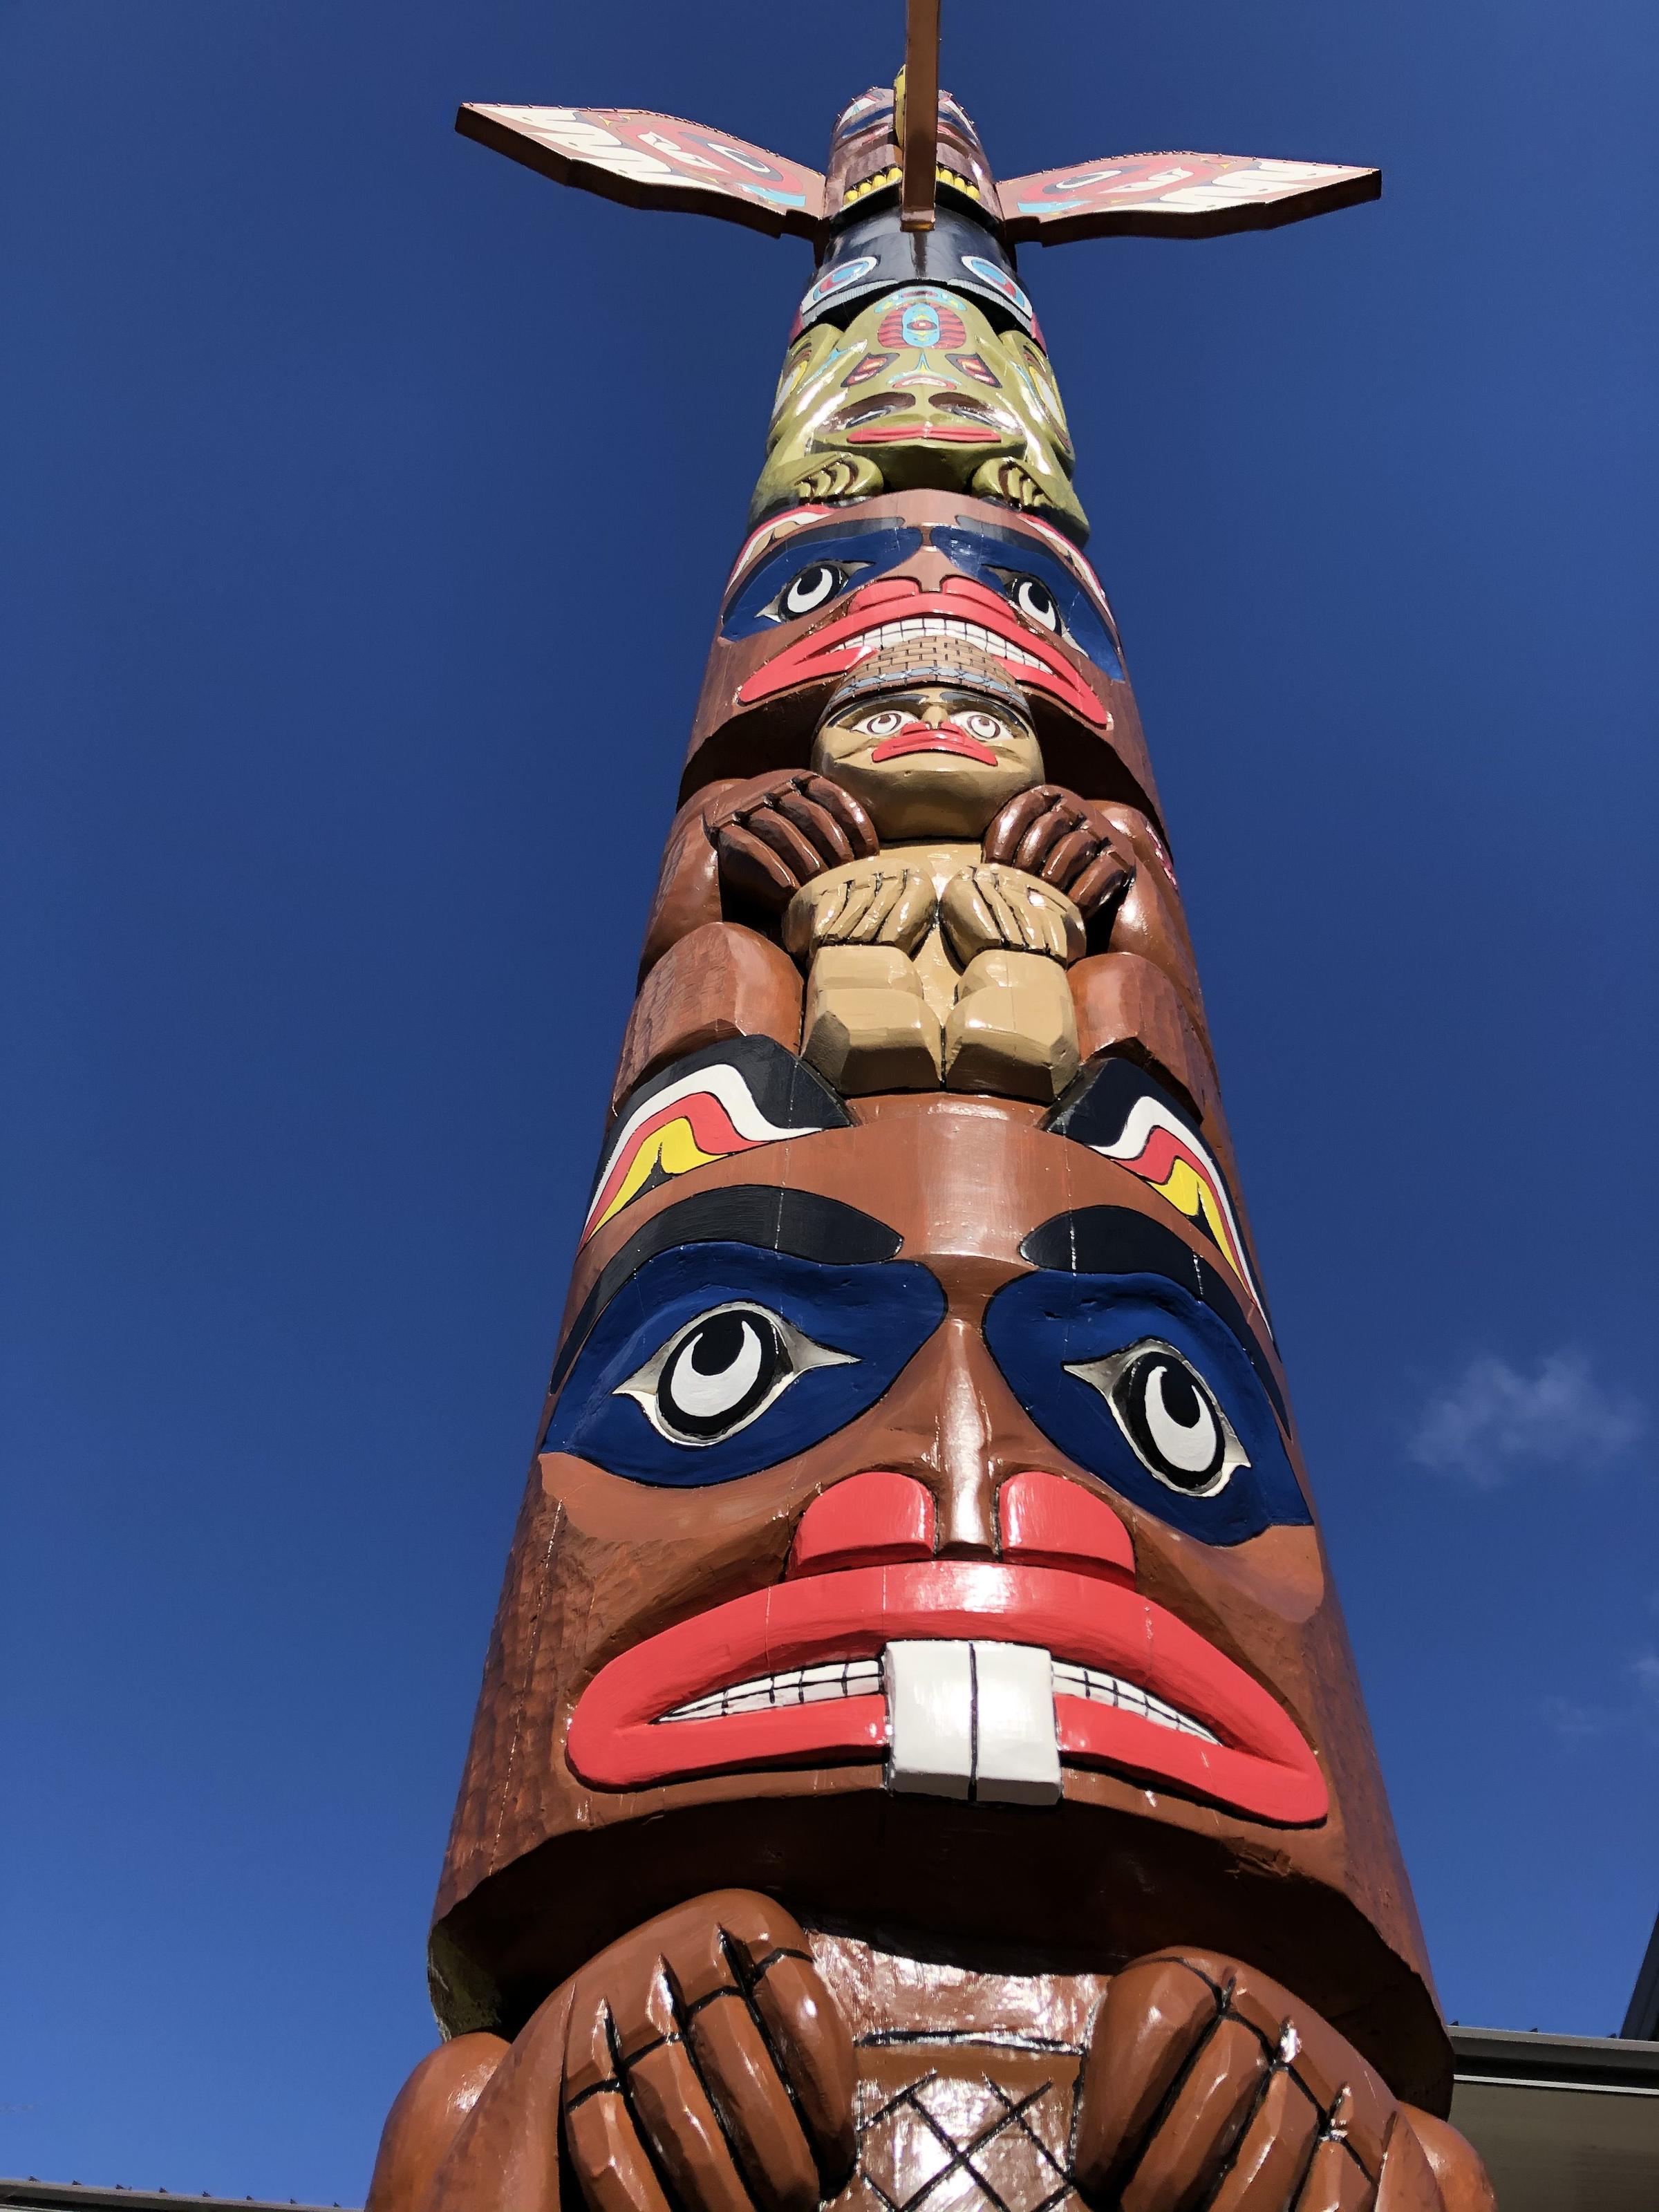 what is totem pole output